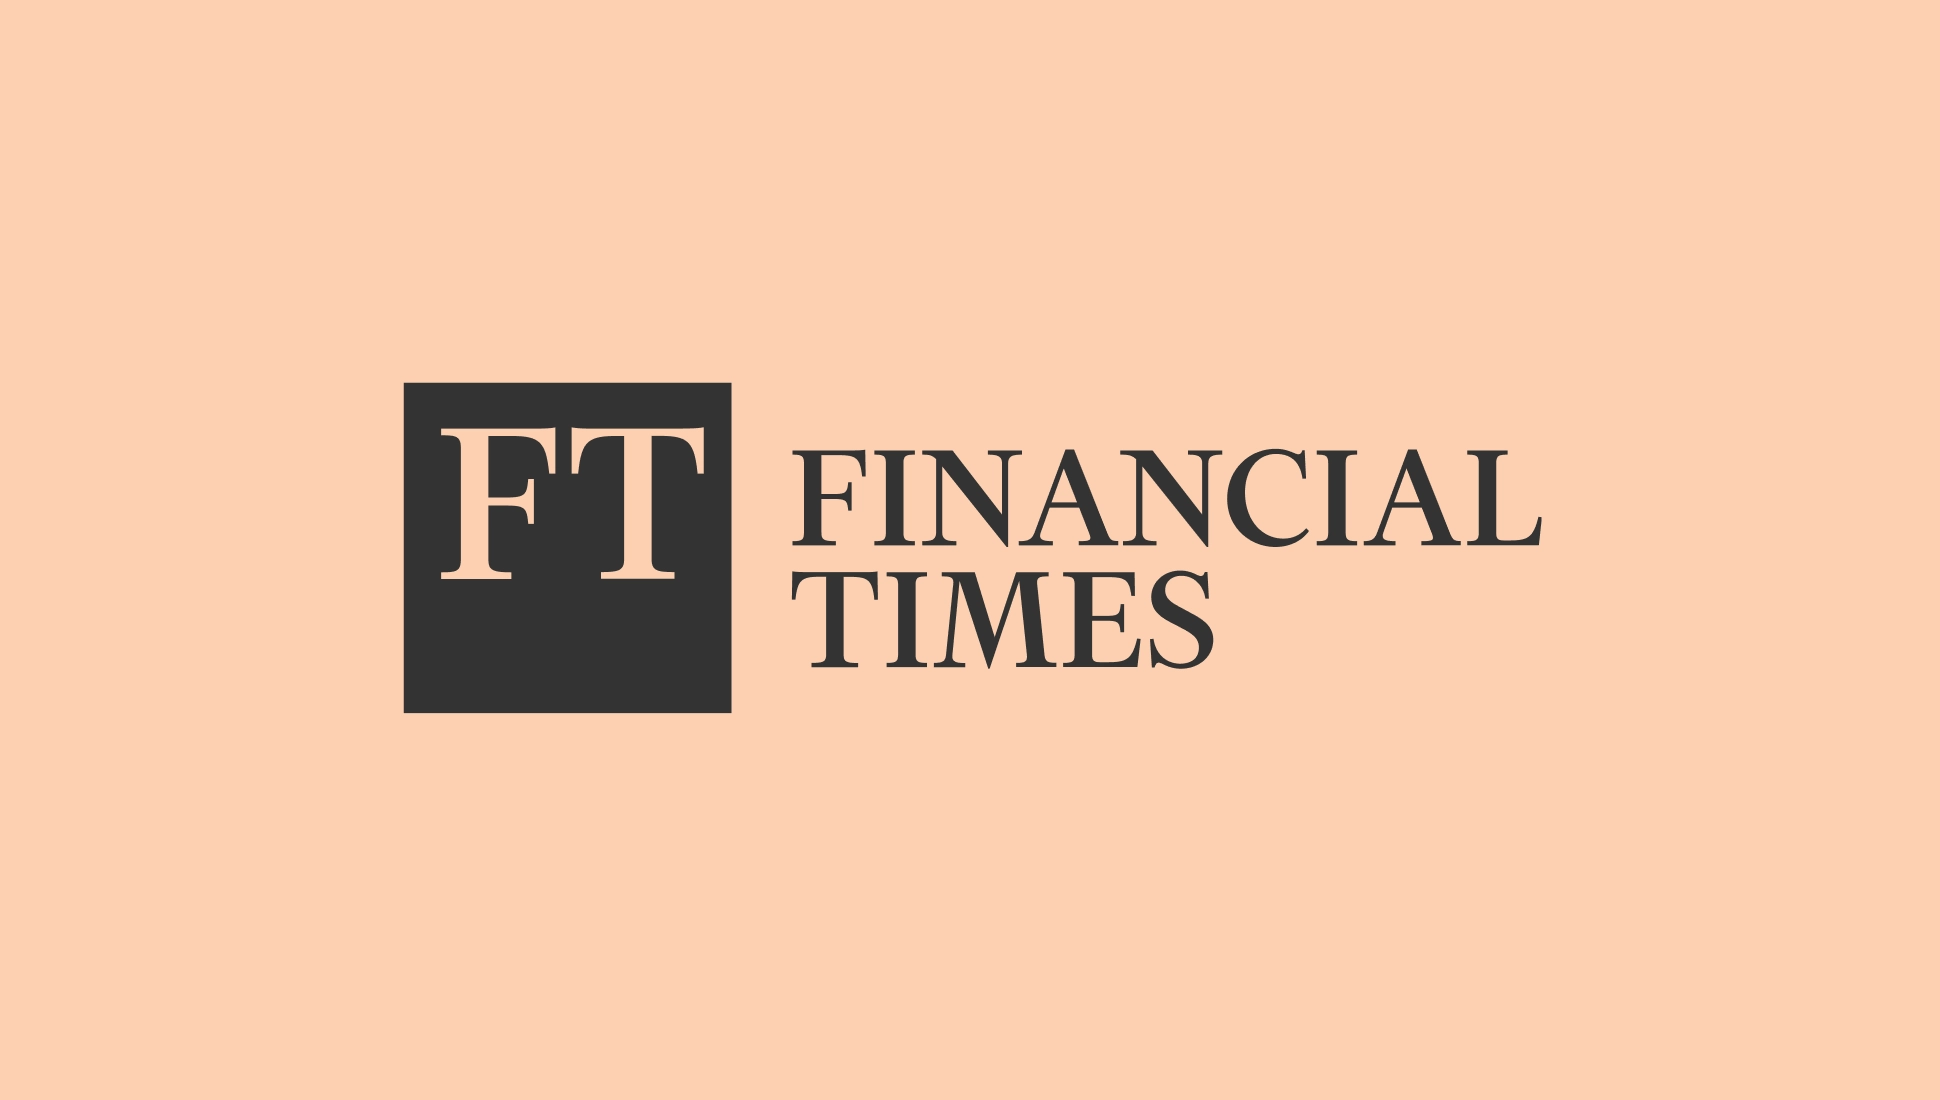 Quick Fire Q&A with the Financial Times